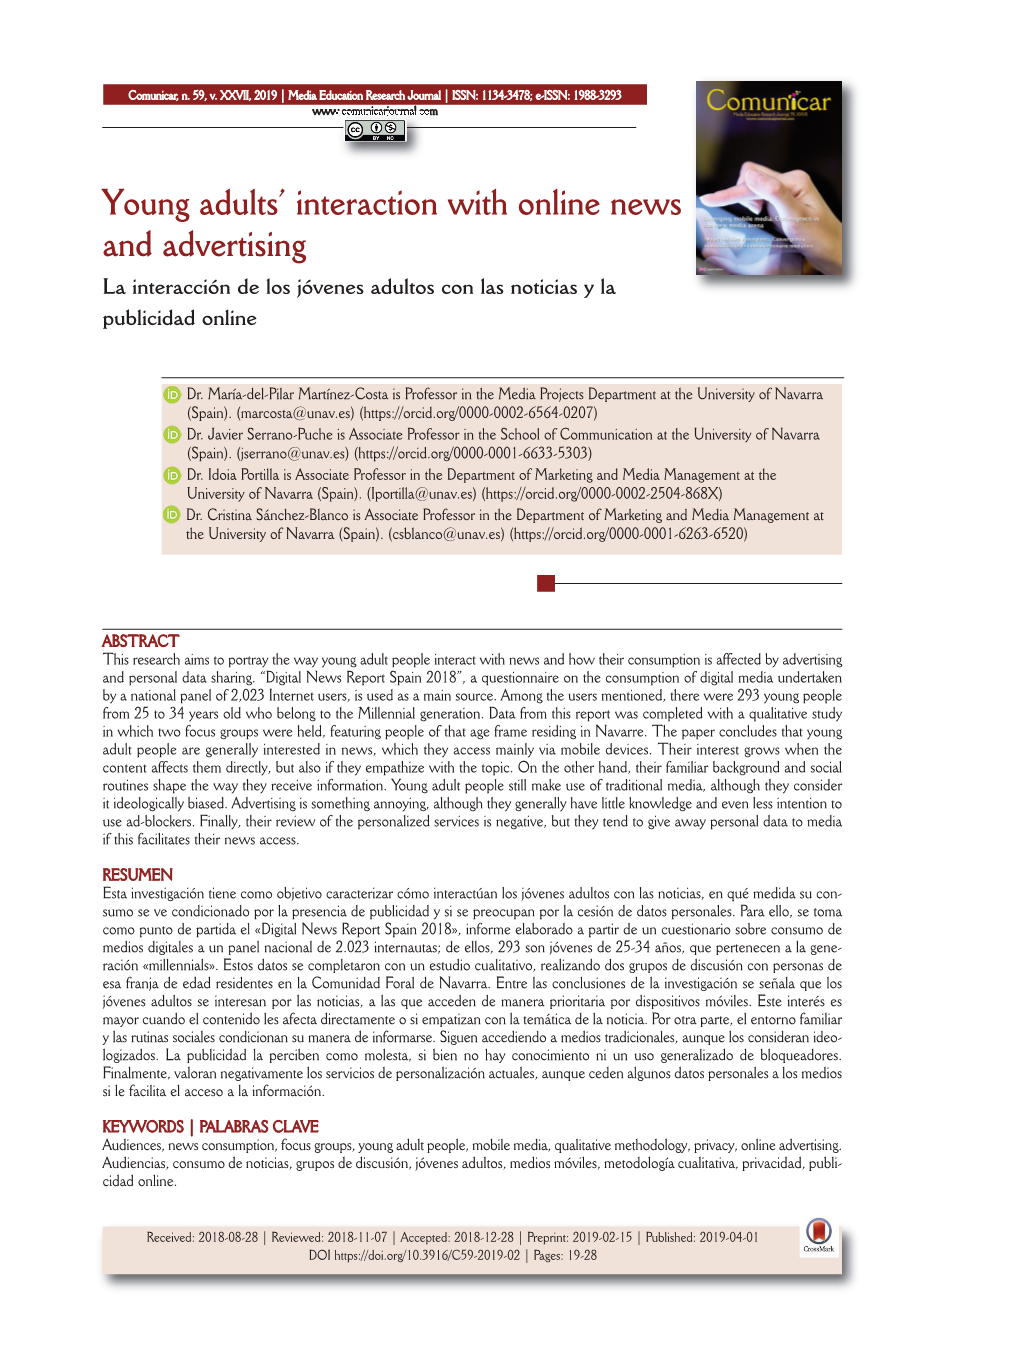 Young Adults' Interaction with Online News and Advertising